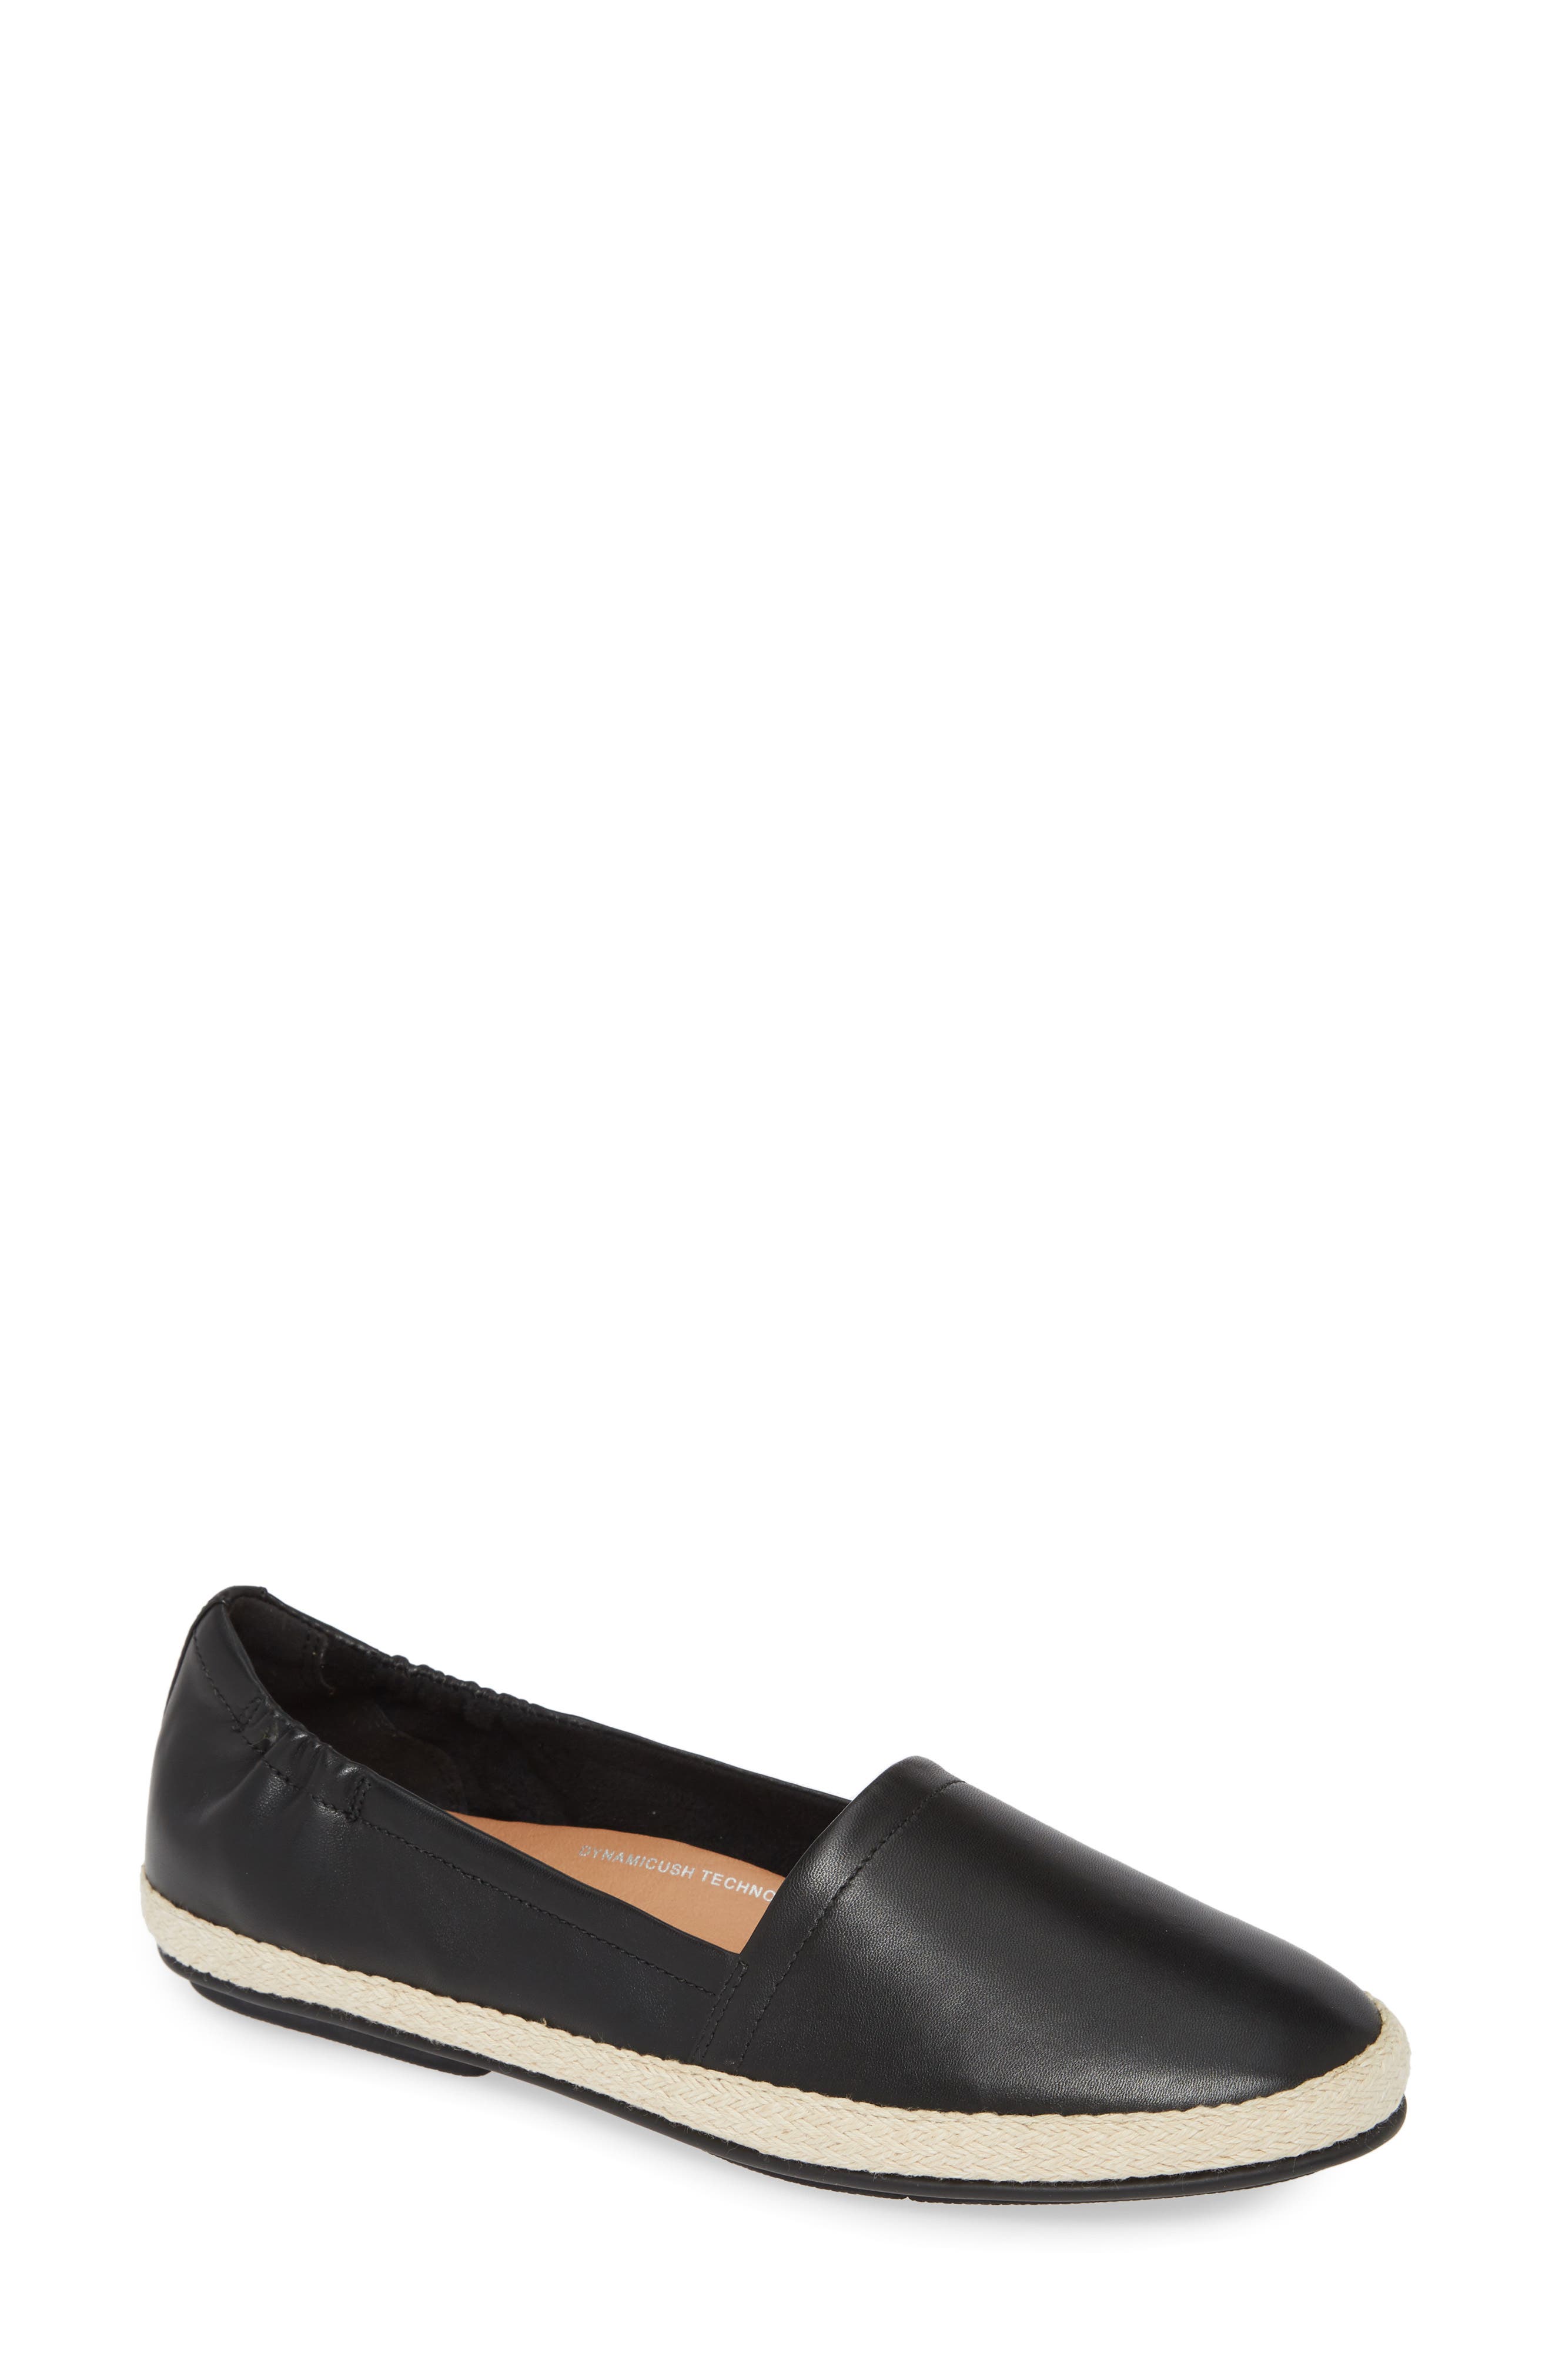 nordstrom fitflop sneakers